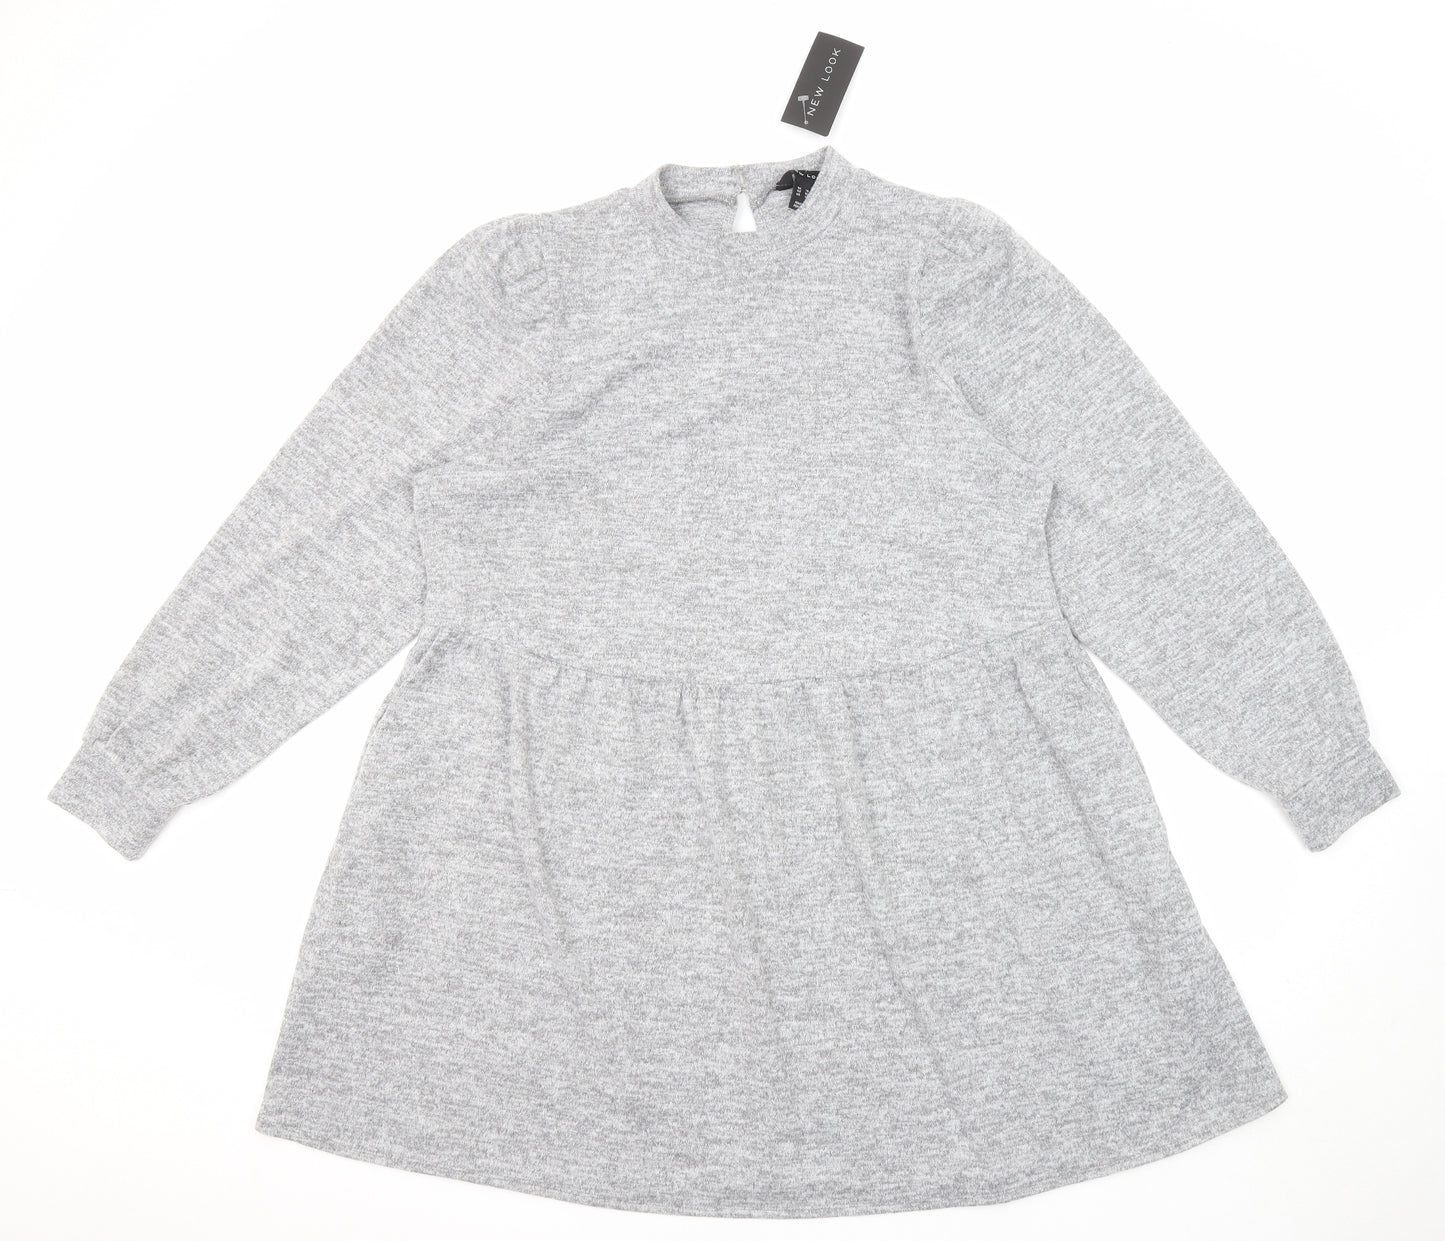 New Look Womens Grey Polyester Jumper Dress Size 18 Round Neck Button